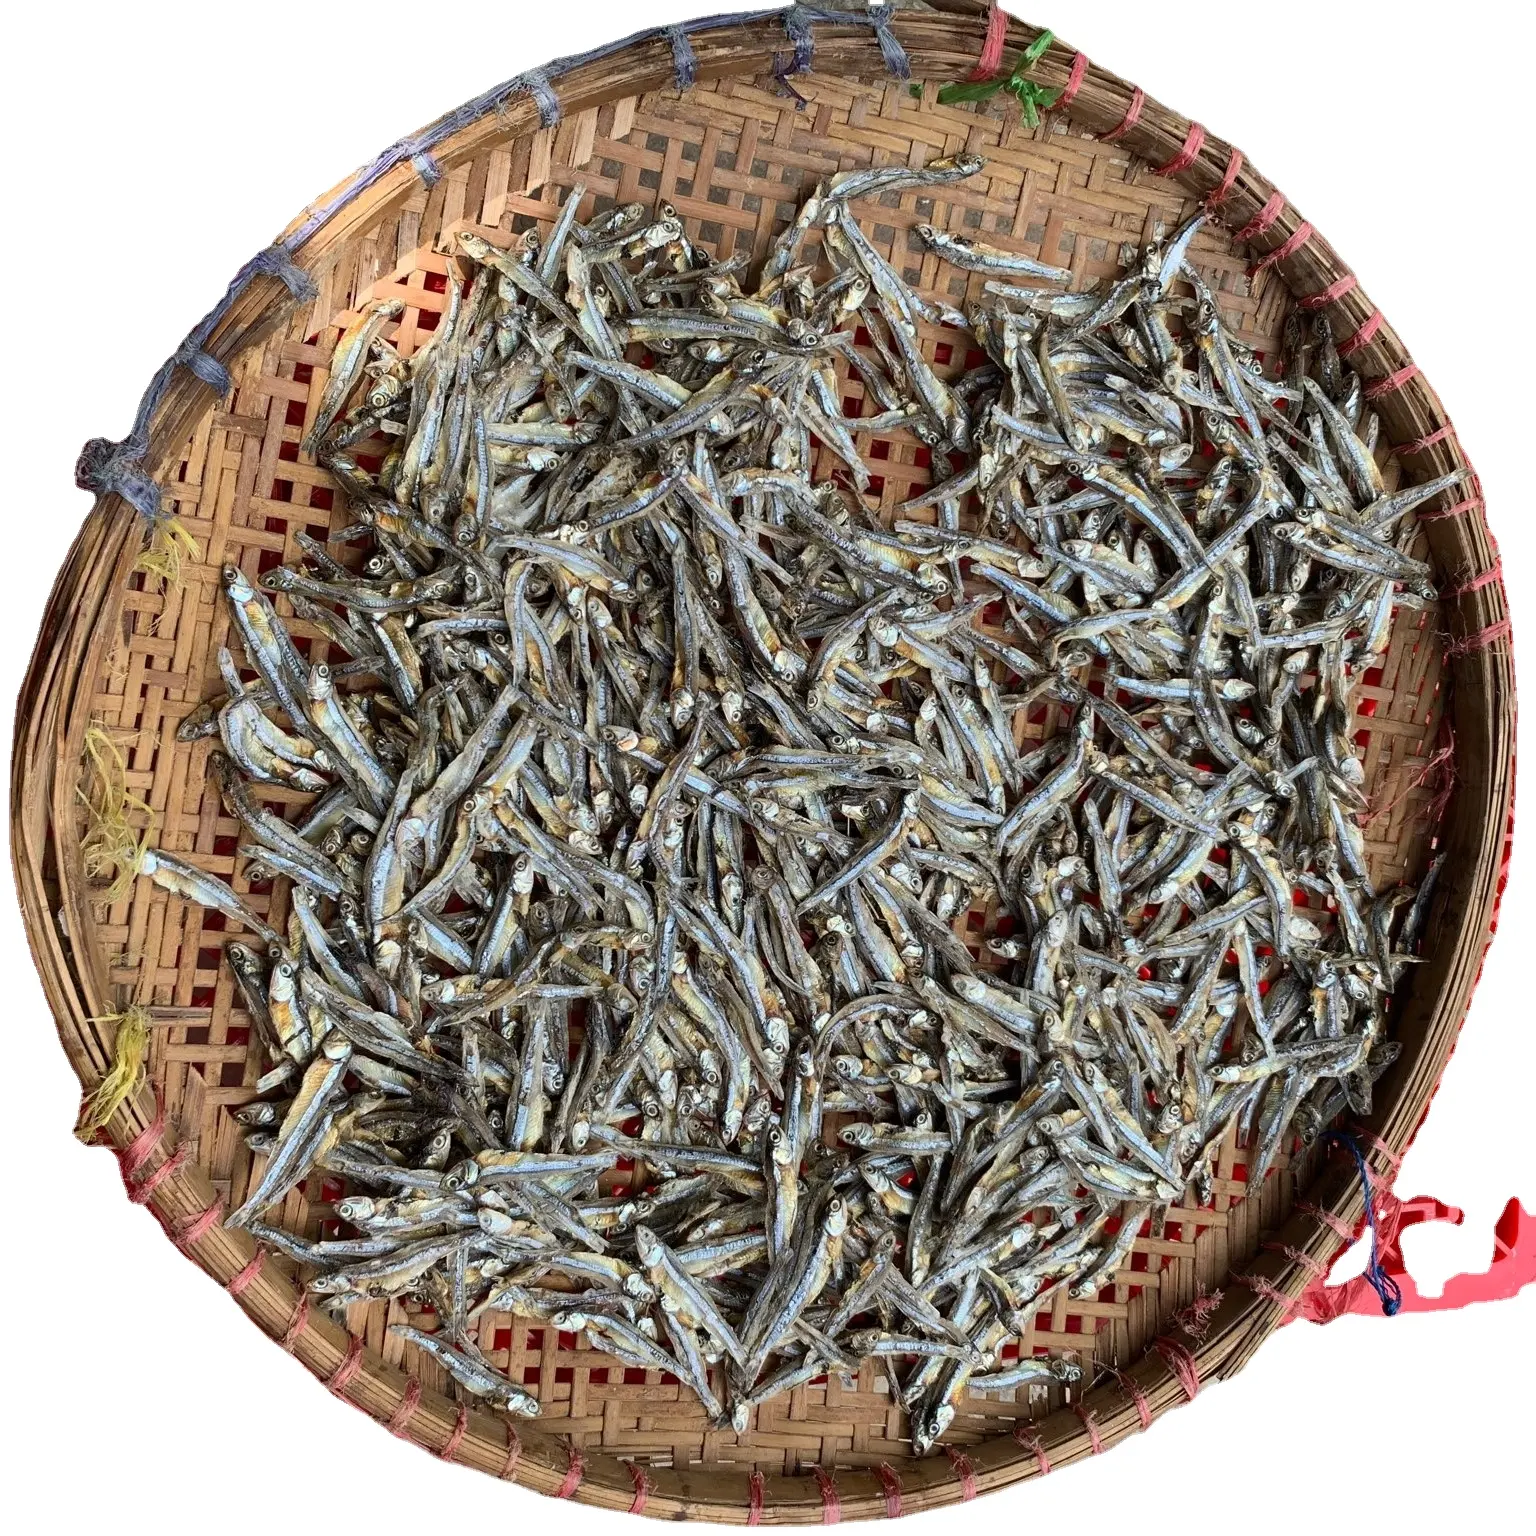 Sun Dried Anchovy Fish From Vietnam